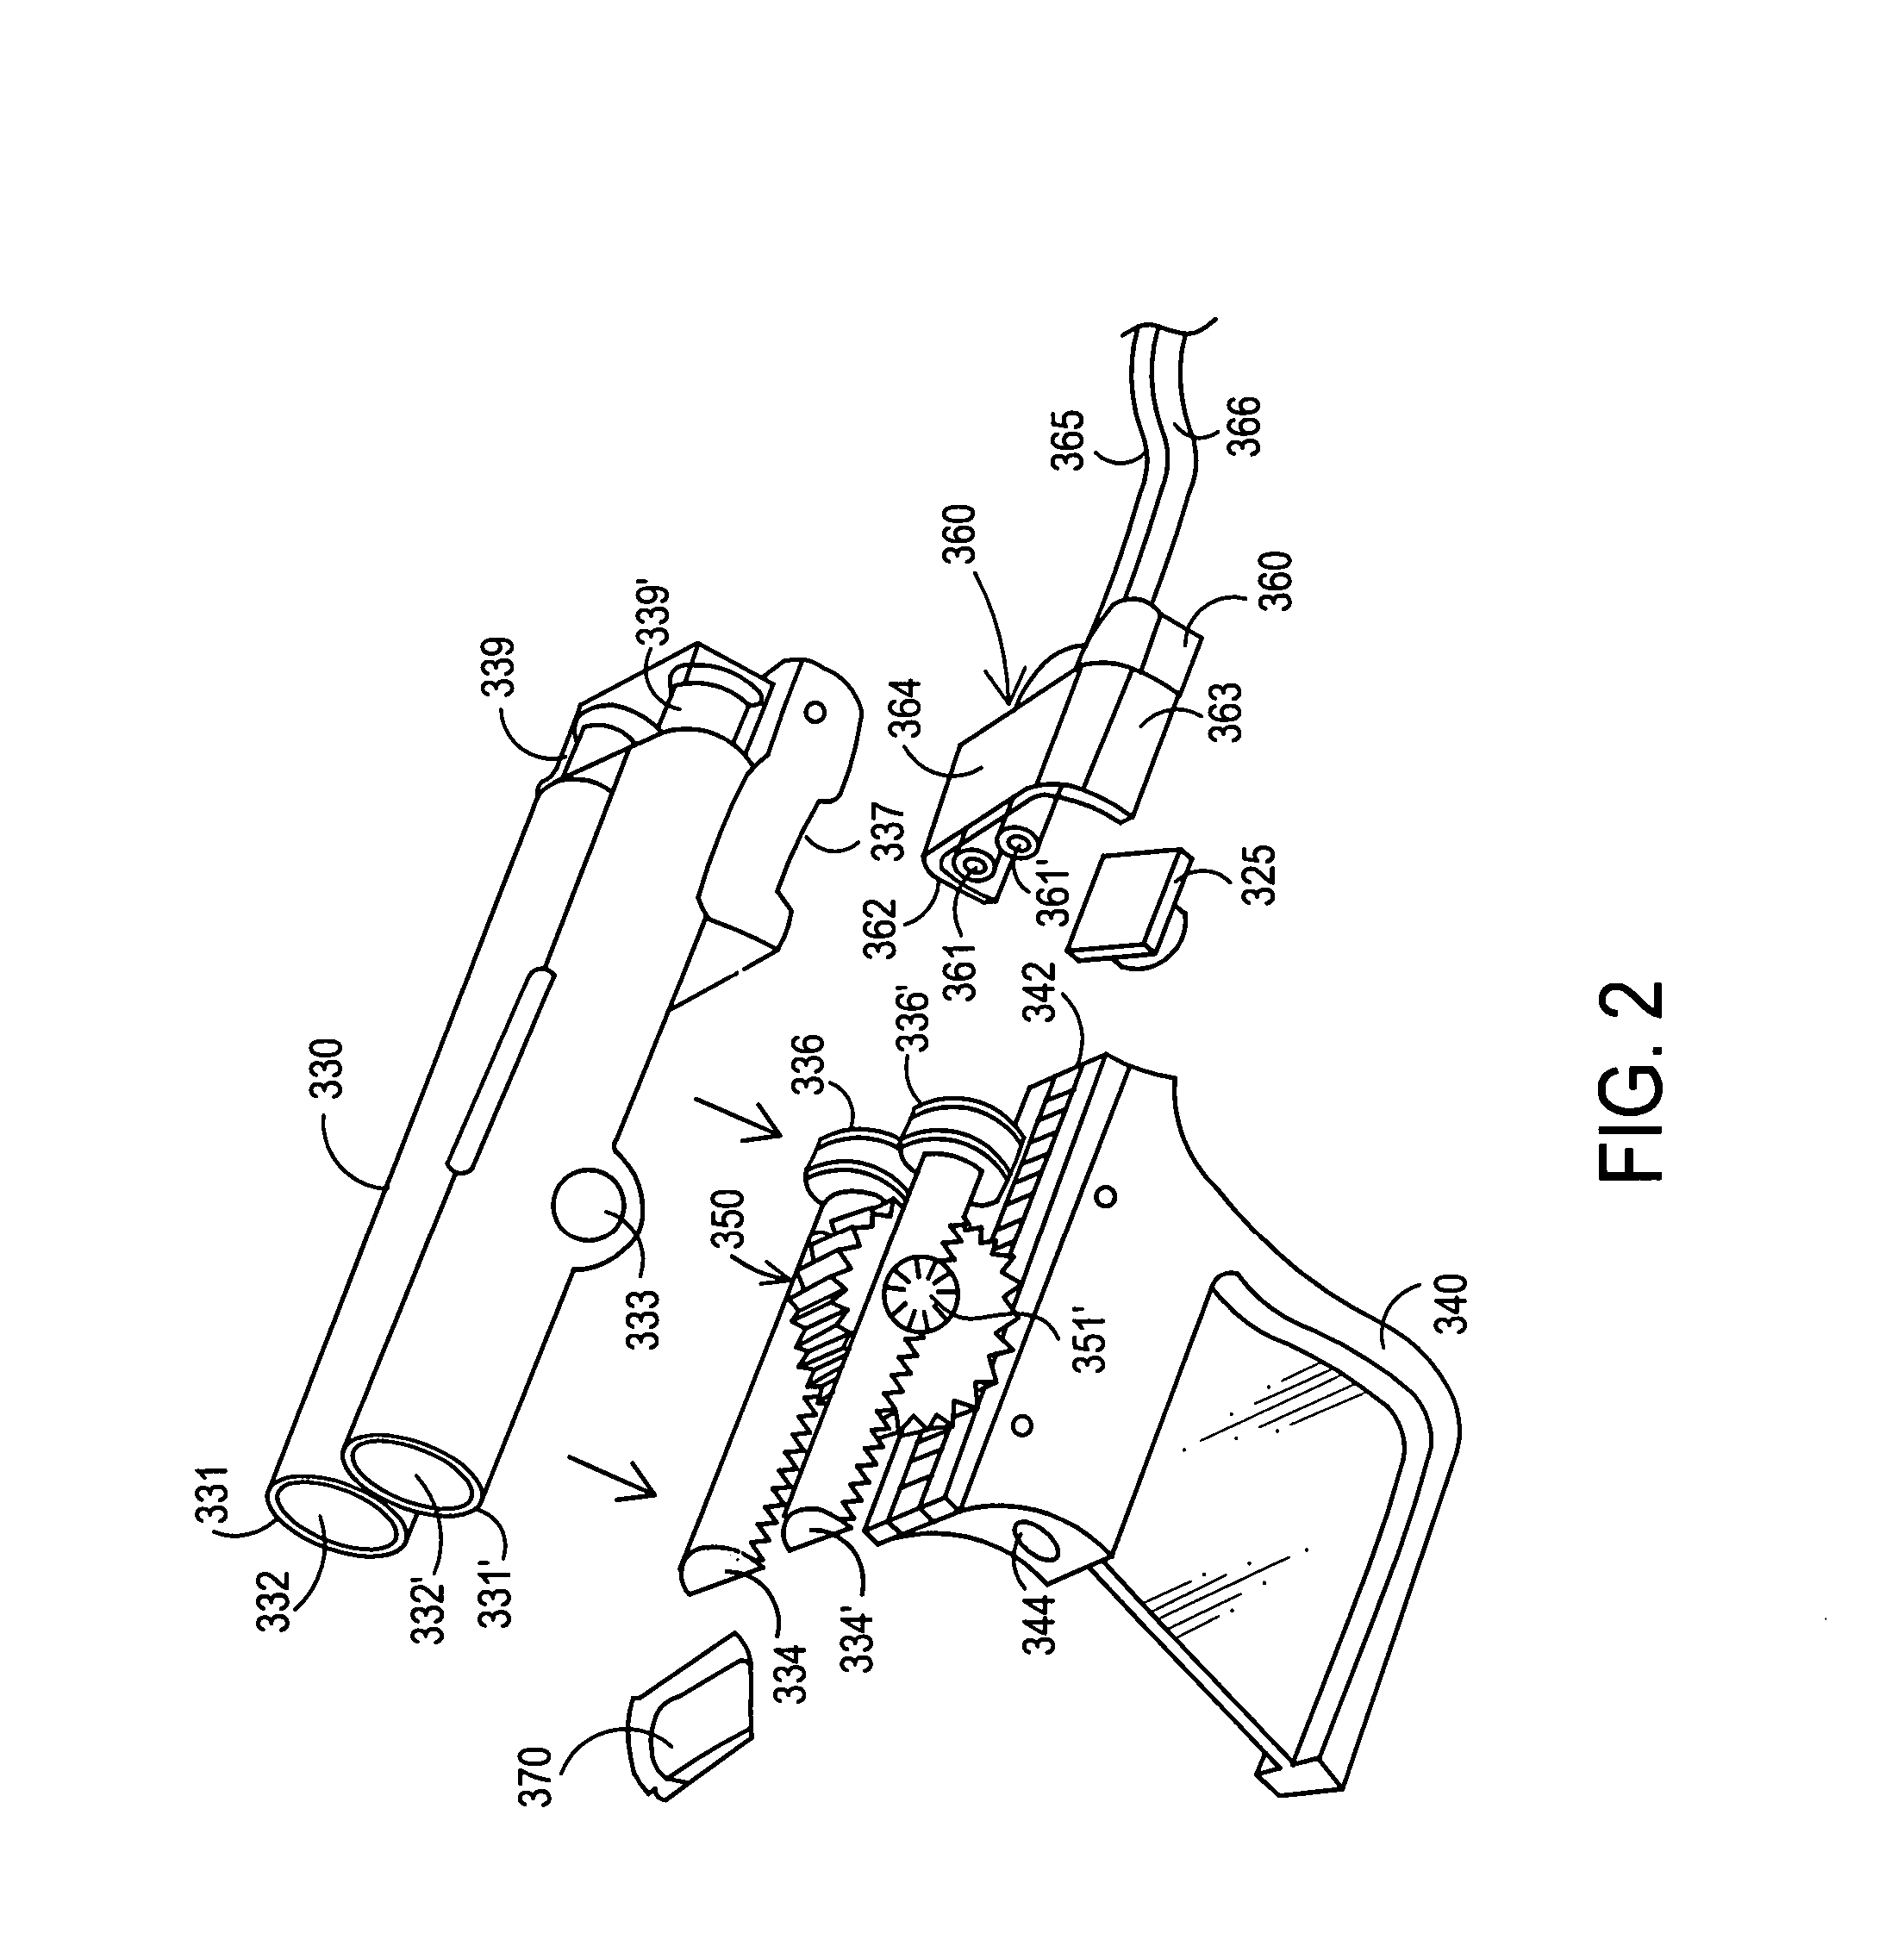 Apparatus and method for delivery of biologic sealant